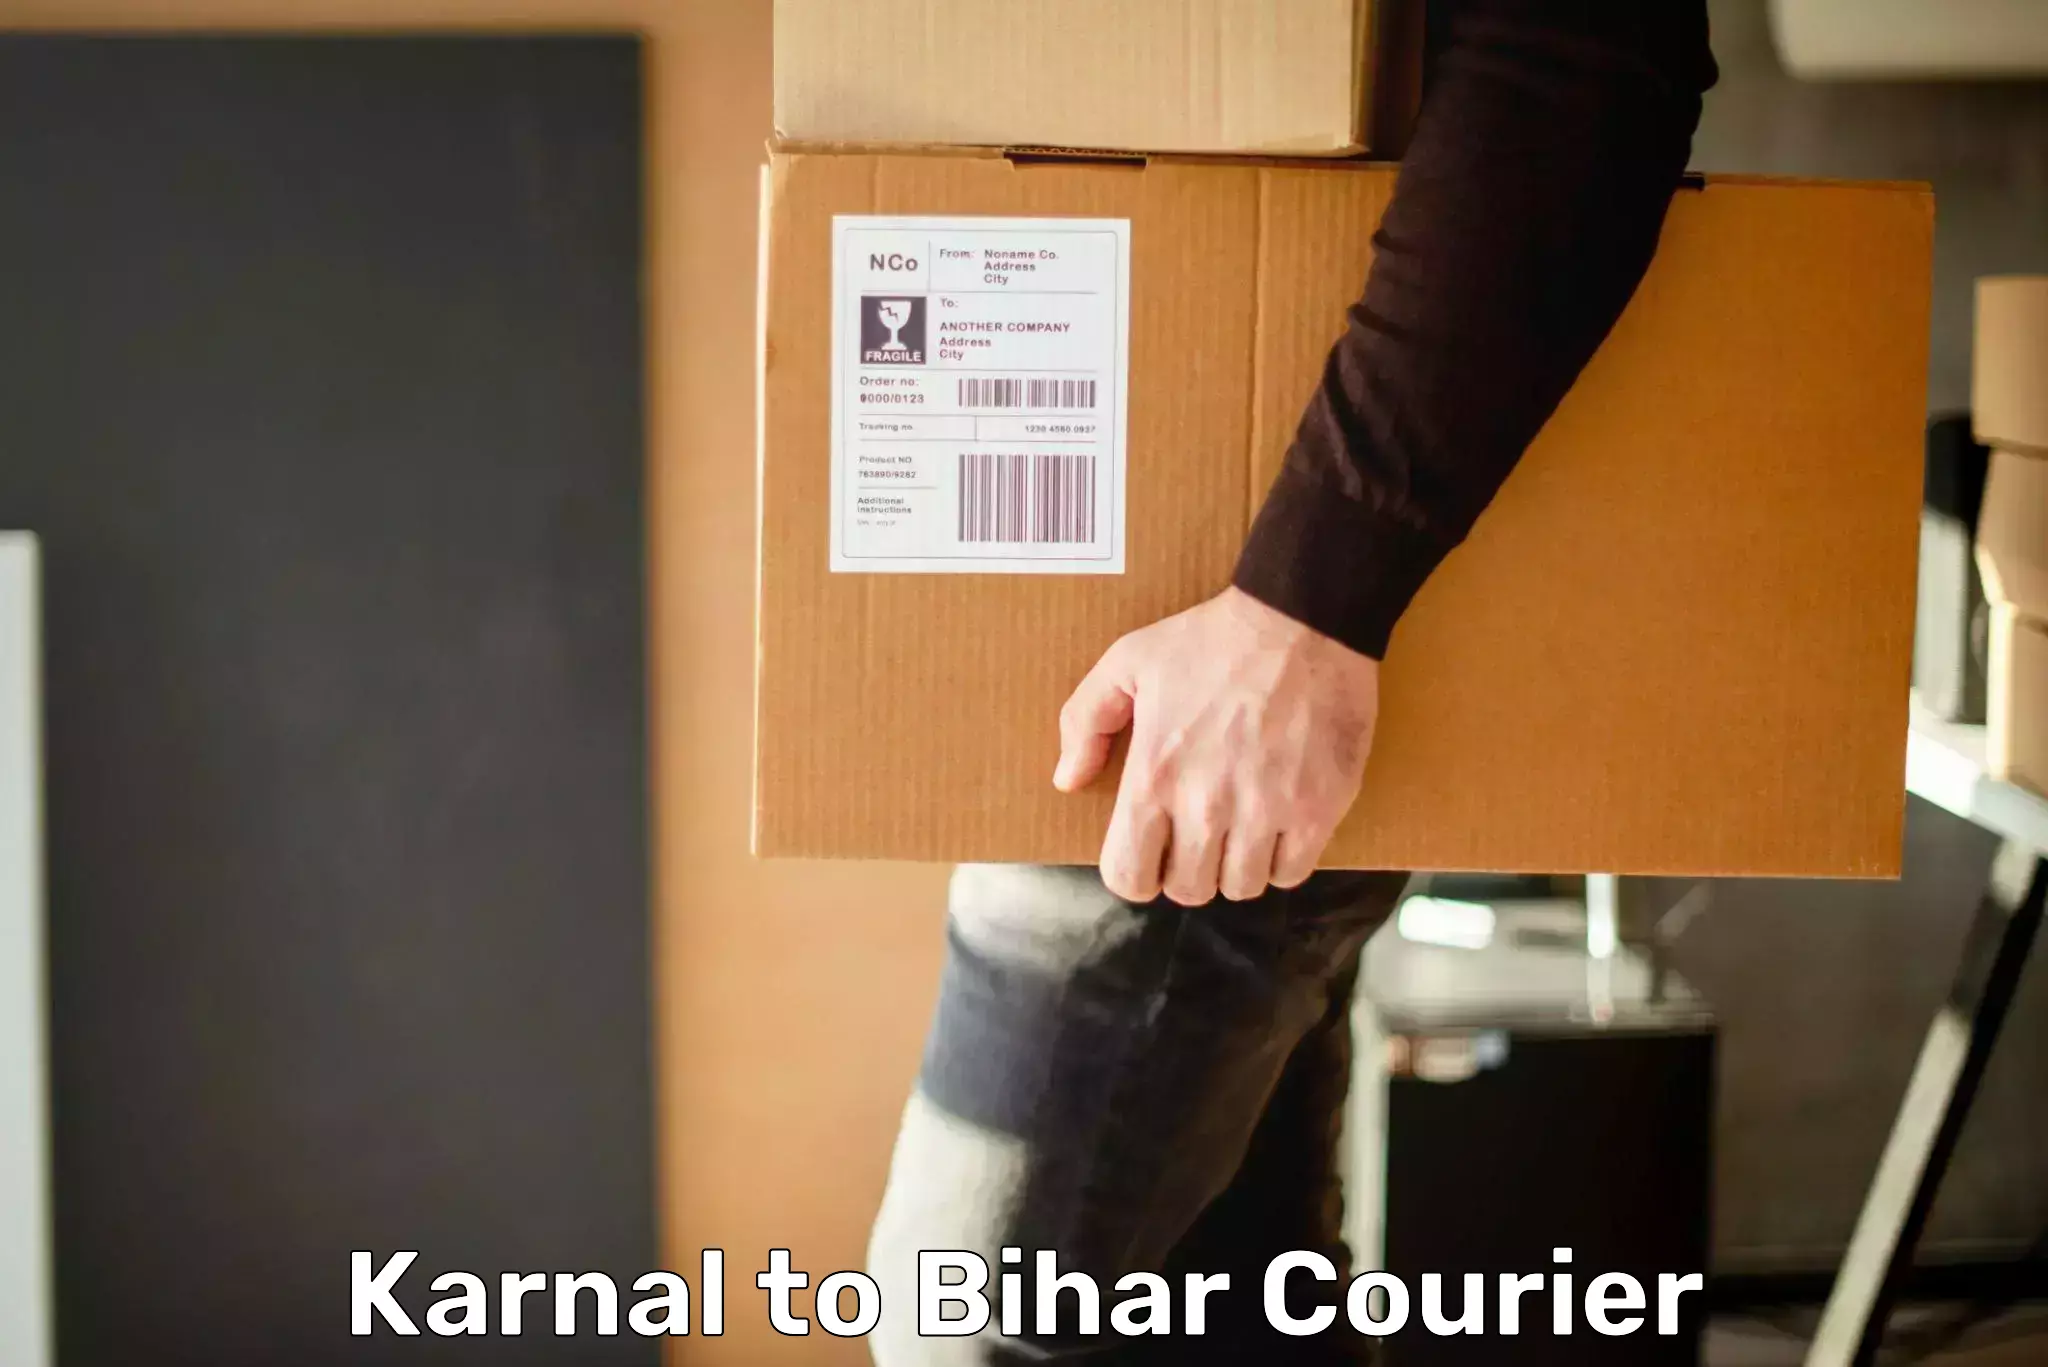 Courier service efficiency Karnal to Bettiah